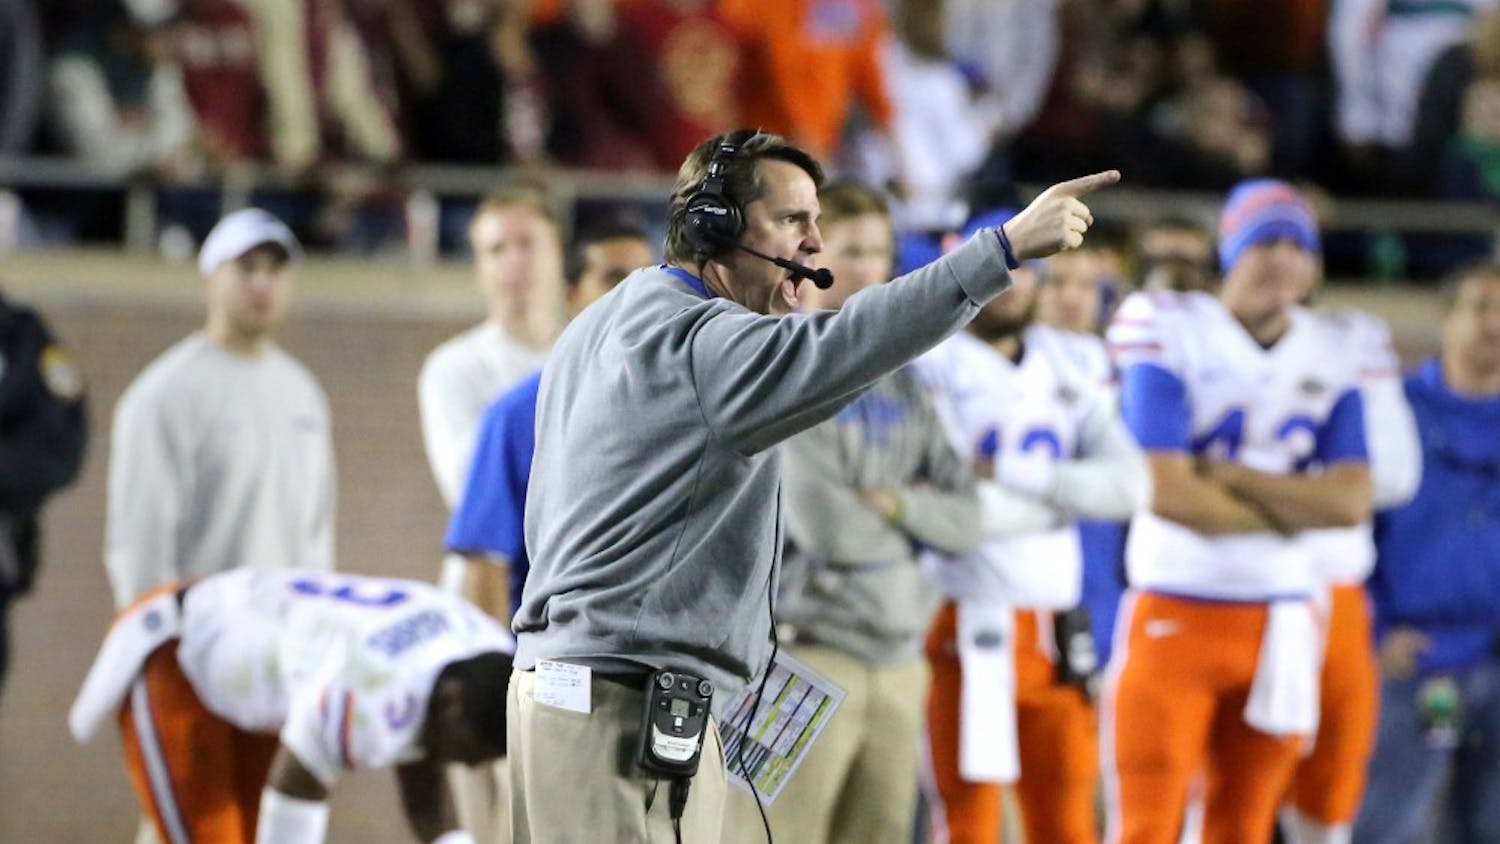 Florida head coach Will Muschamp makes a point during action against Florida State at Doak Campbell Stadium in Tallahassee, Fla., on Saturday, Nov. 29, 2014. Florida State won, 24-19. (Joe Burbank/Orlando Sentinel/TNS)